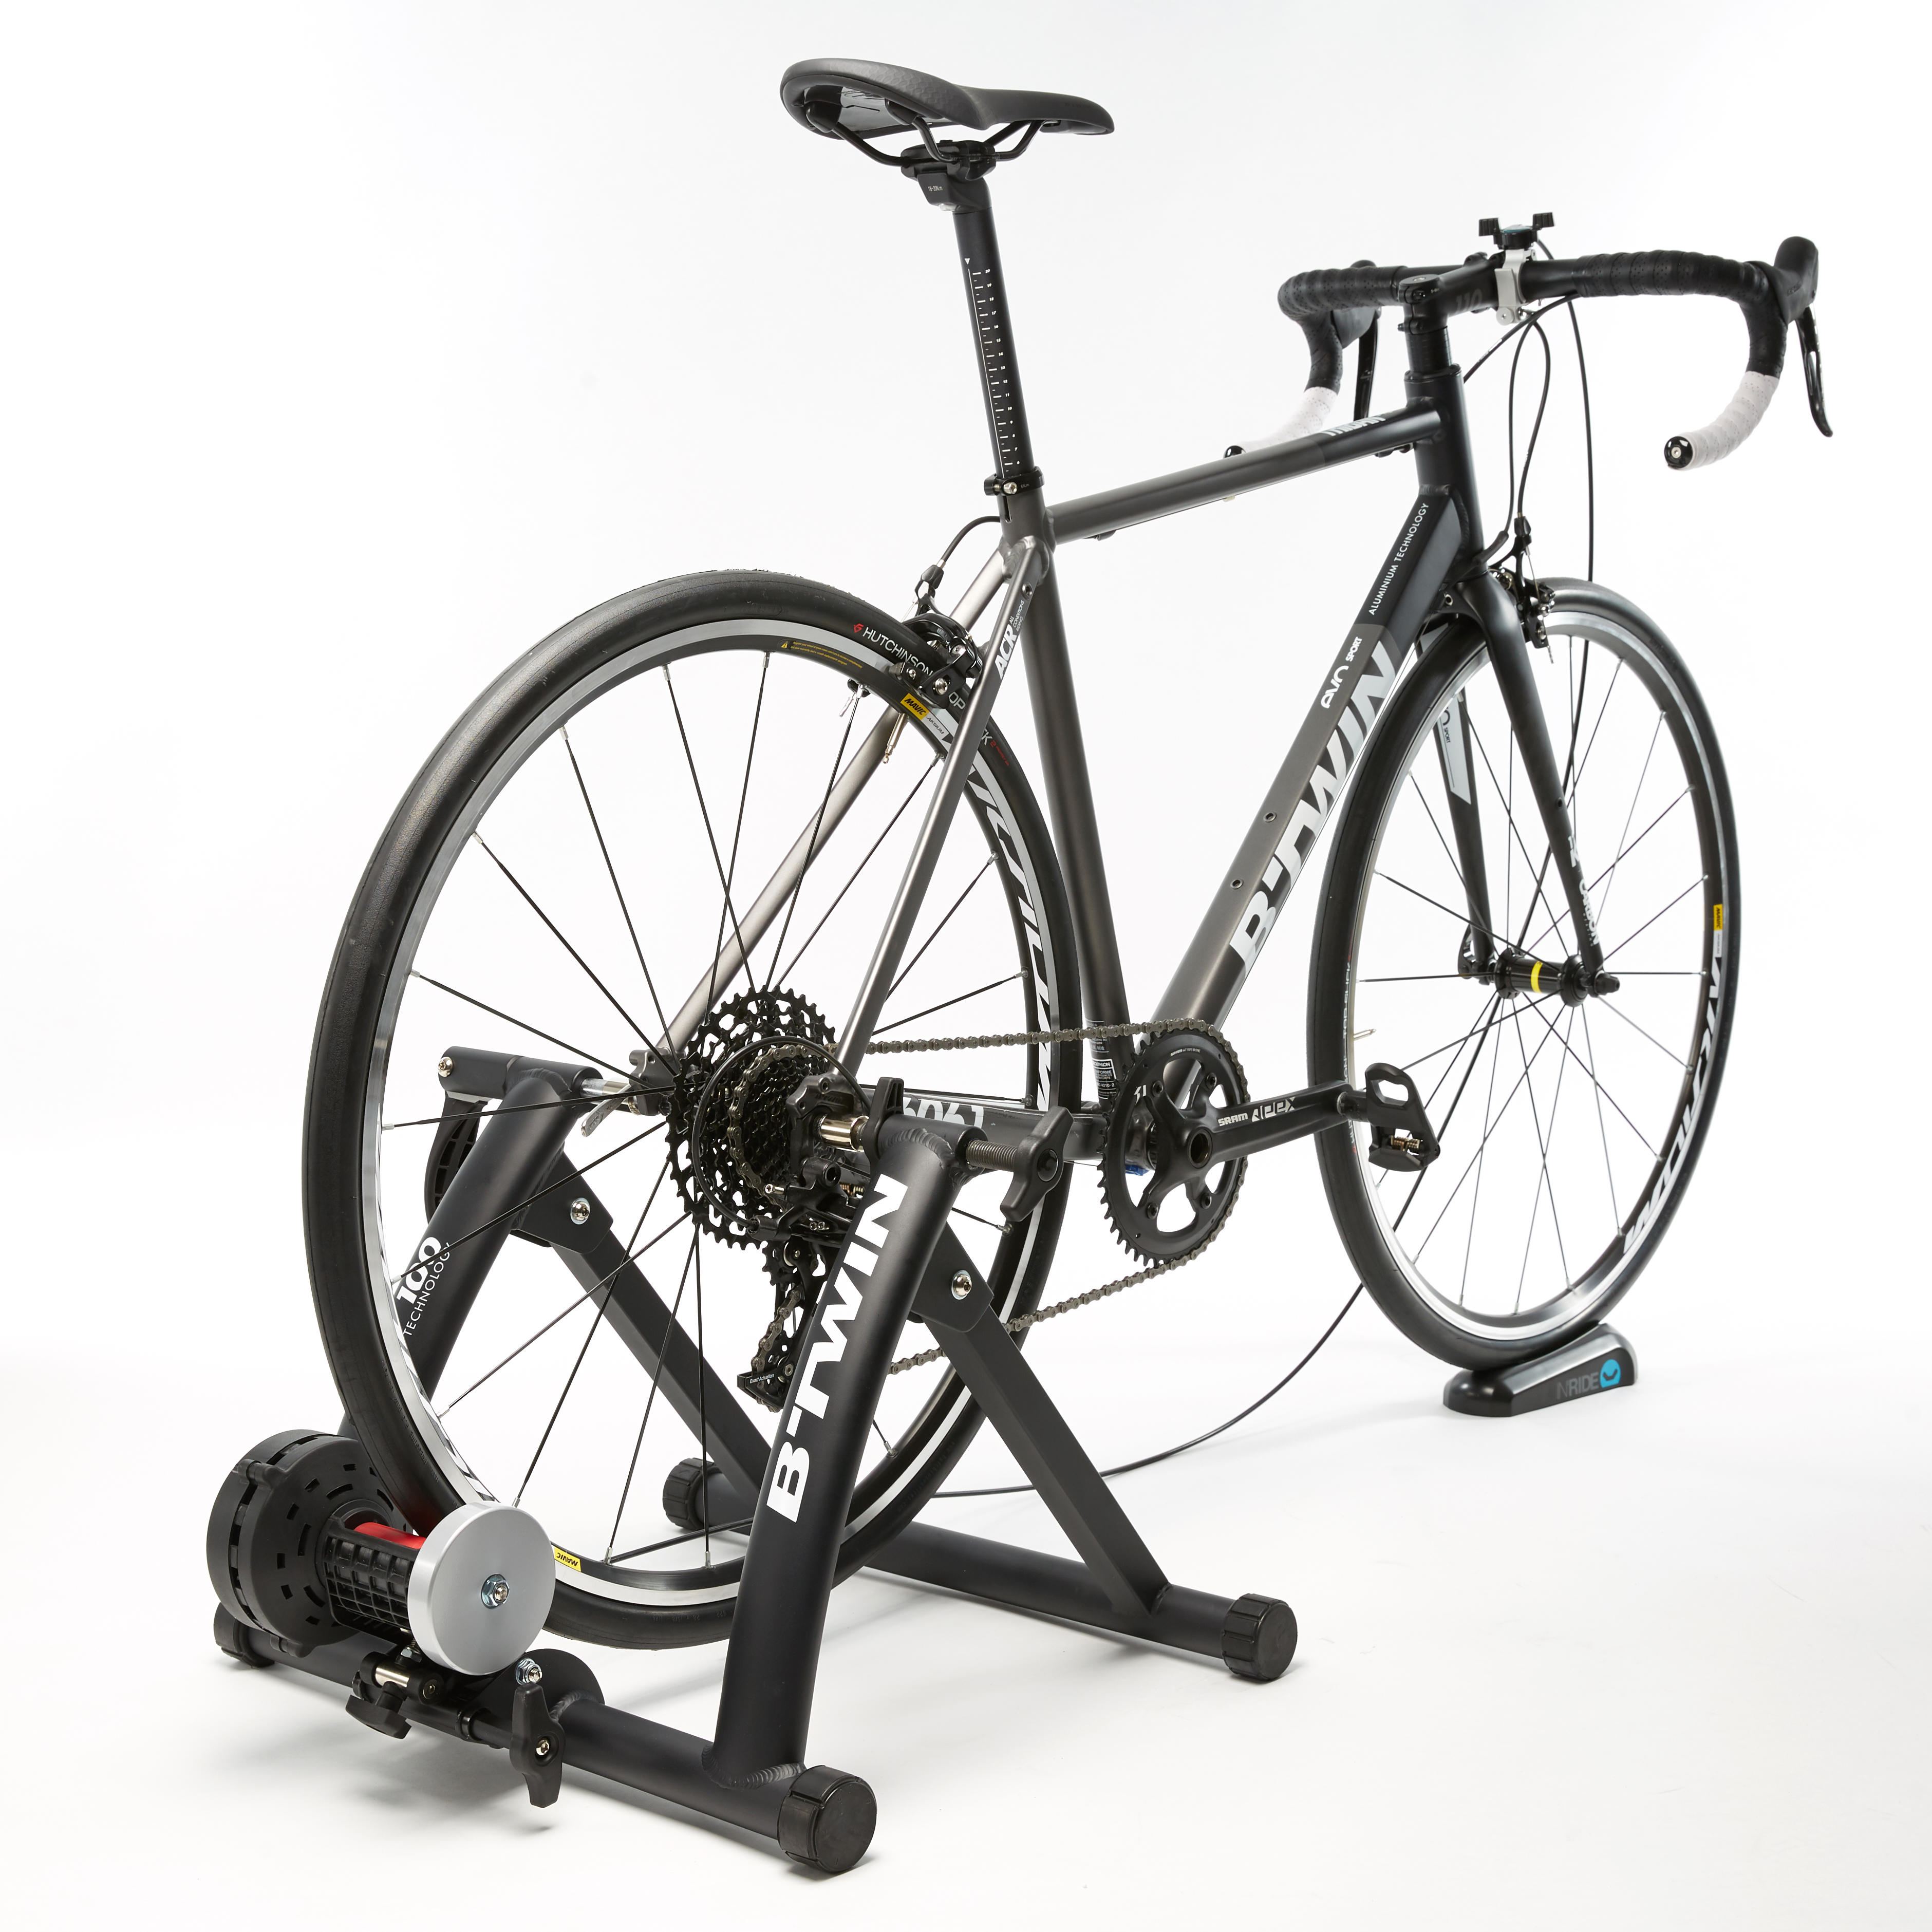 repco bicycle home trainer